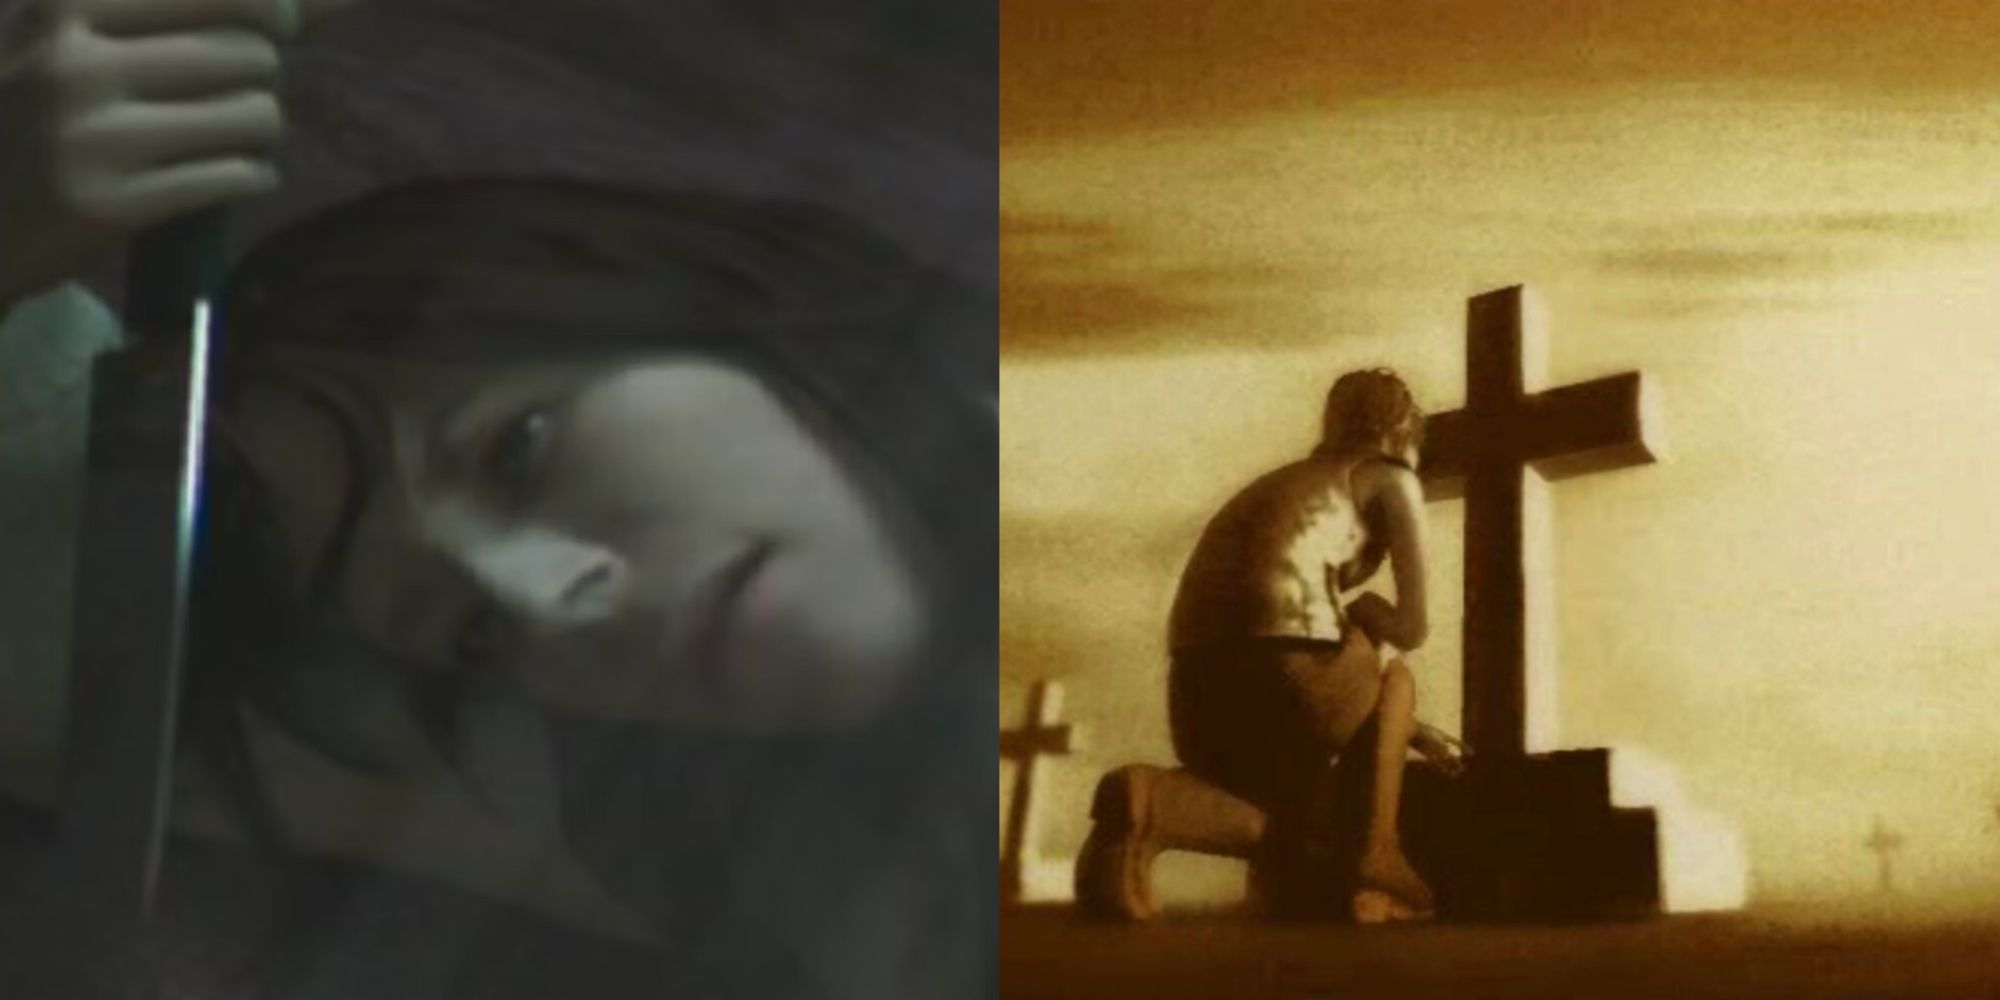 Angela from Silent Hill 2 and the ending picture from Silent Hill 3